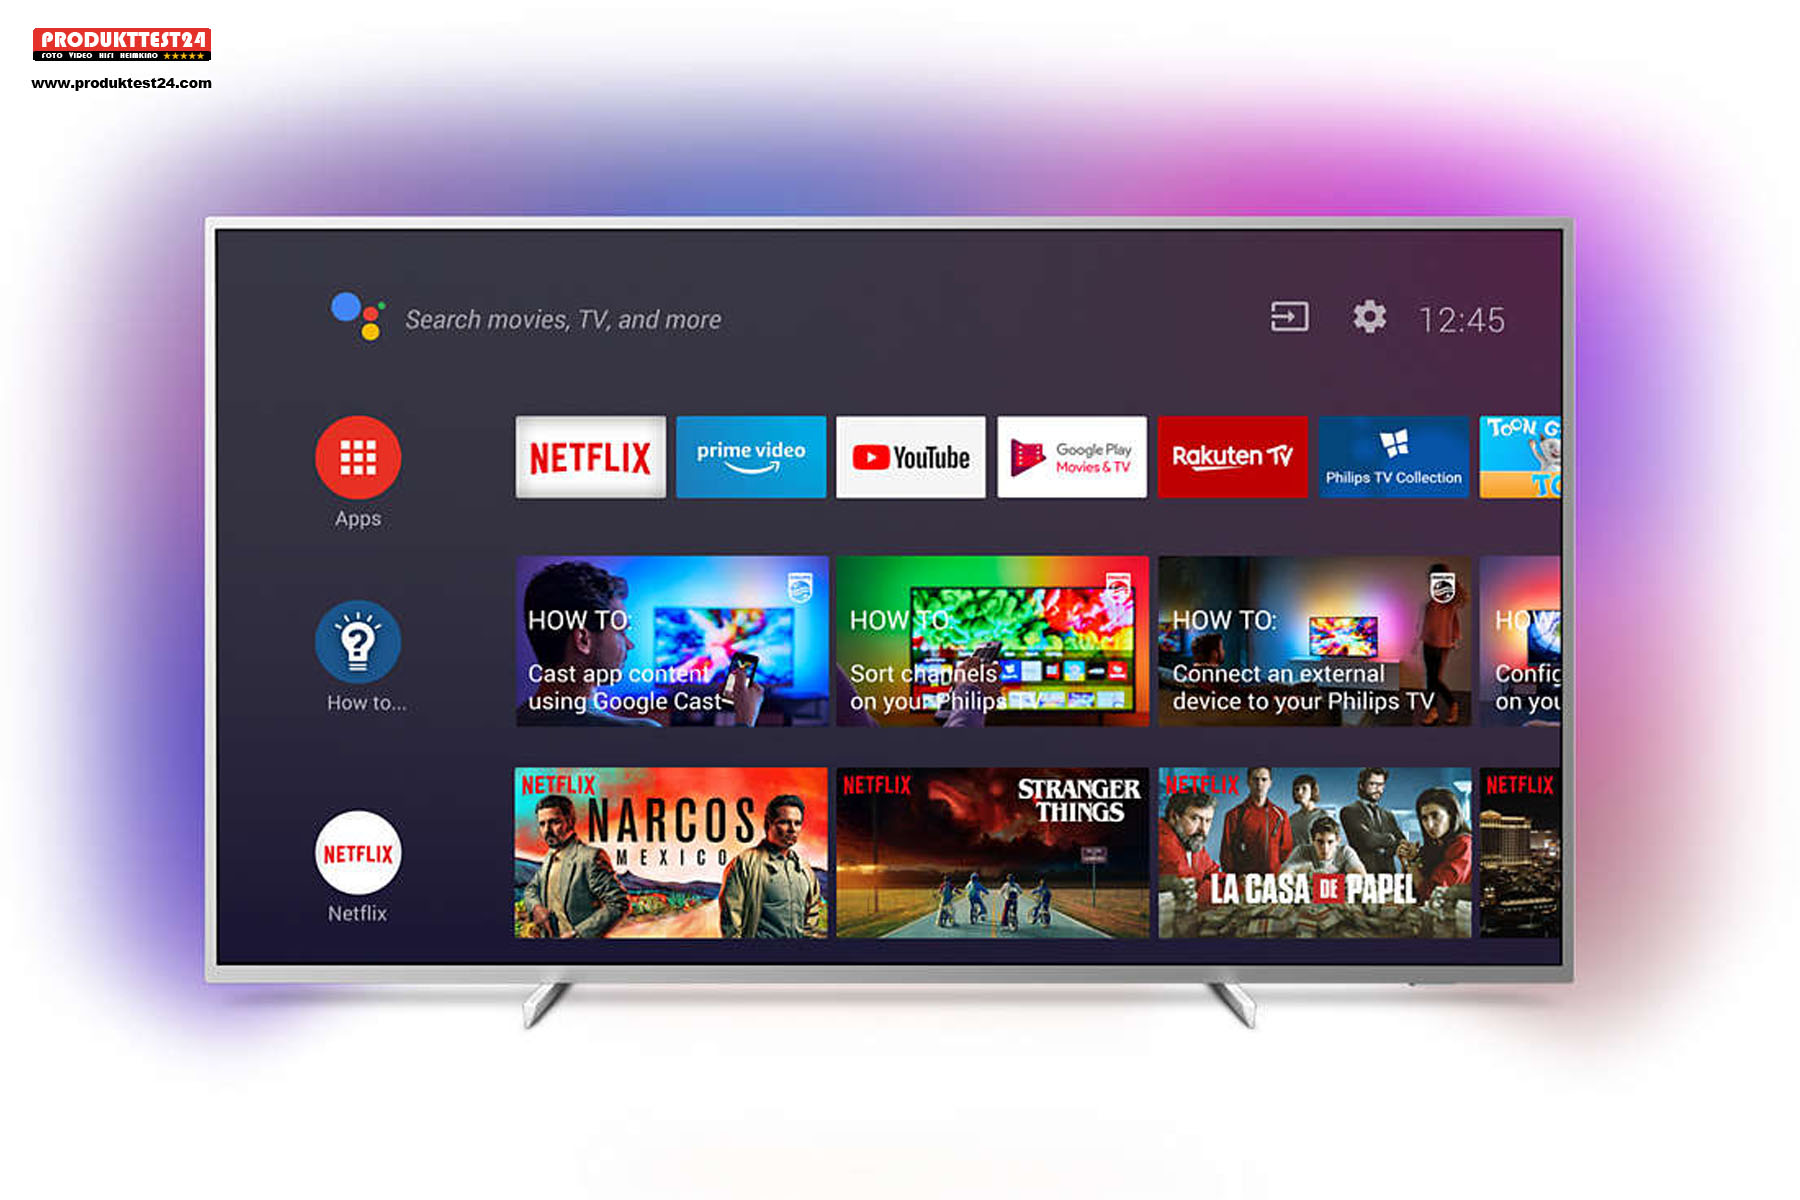 Android 9.0 Pie SmartTV